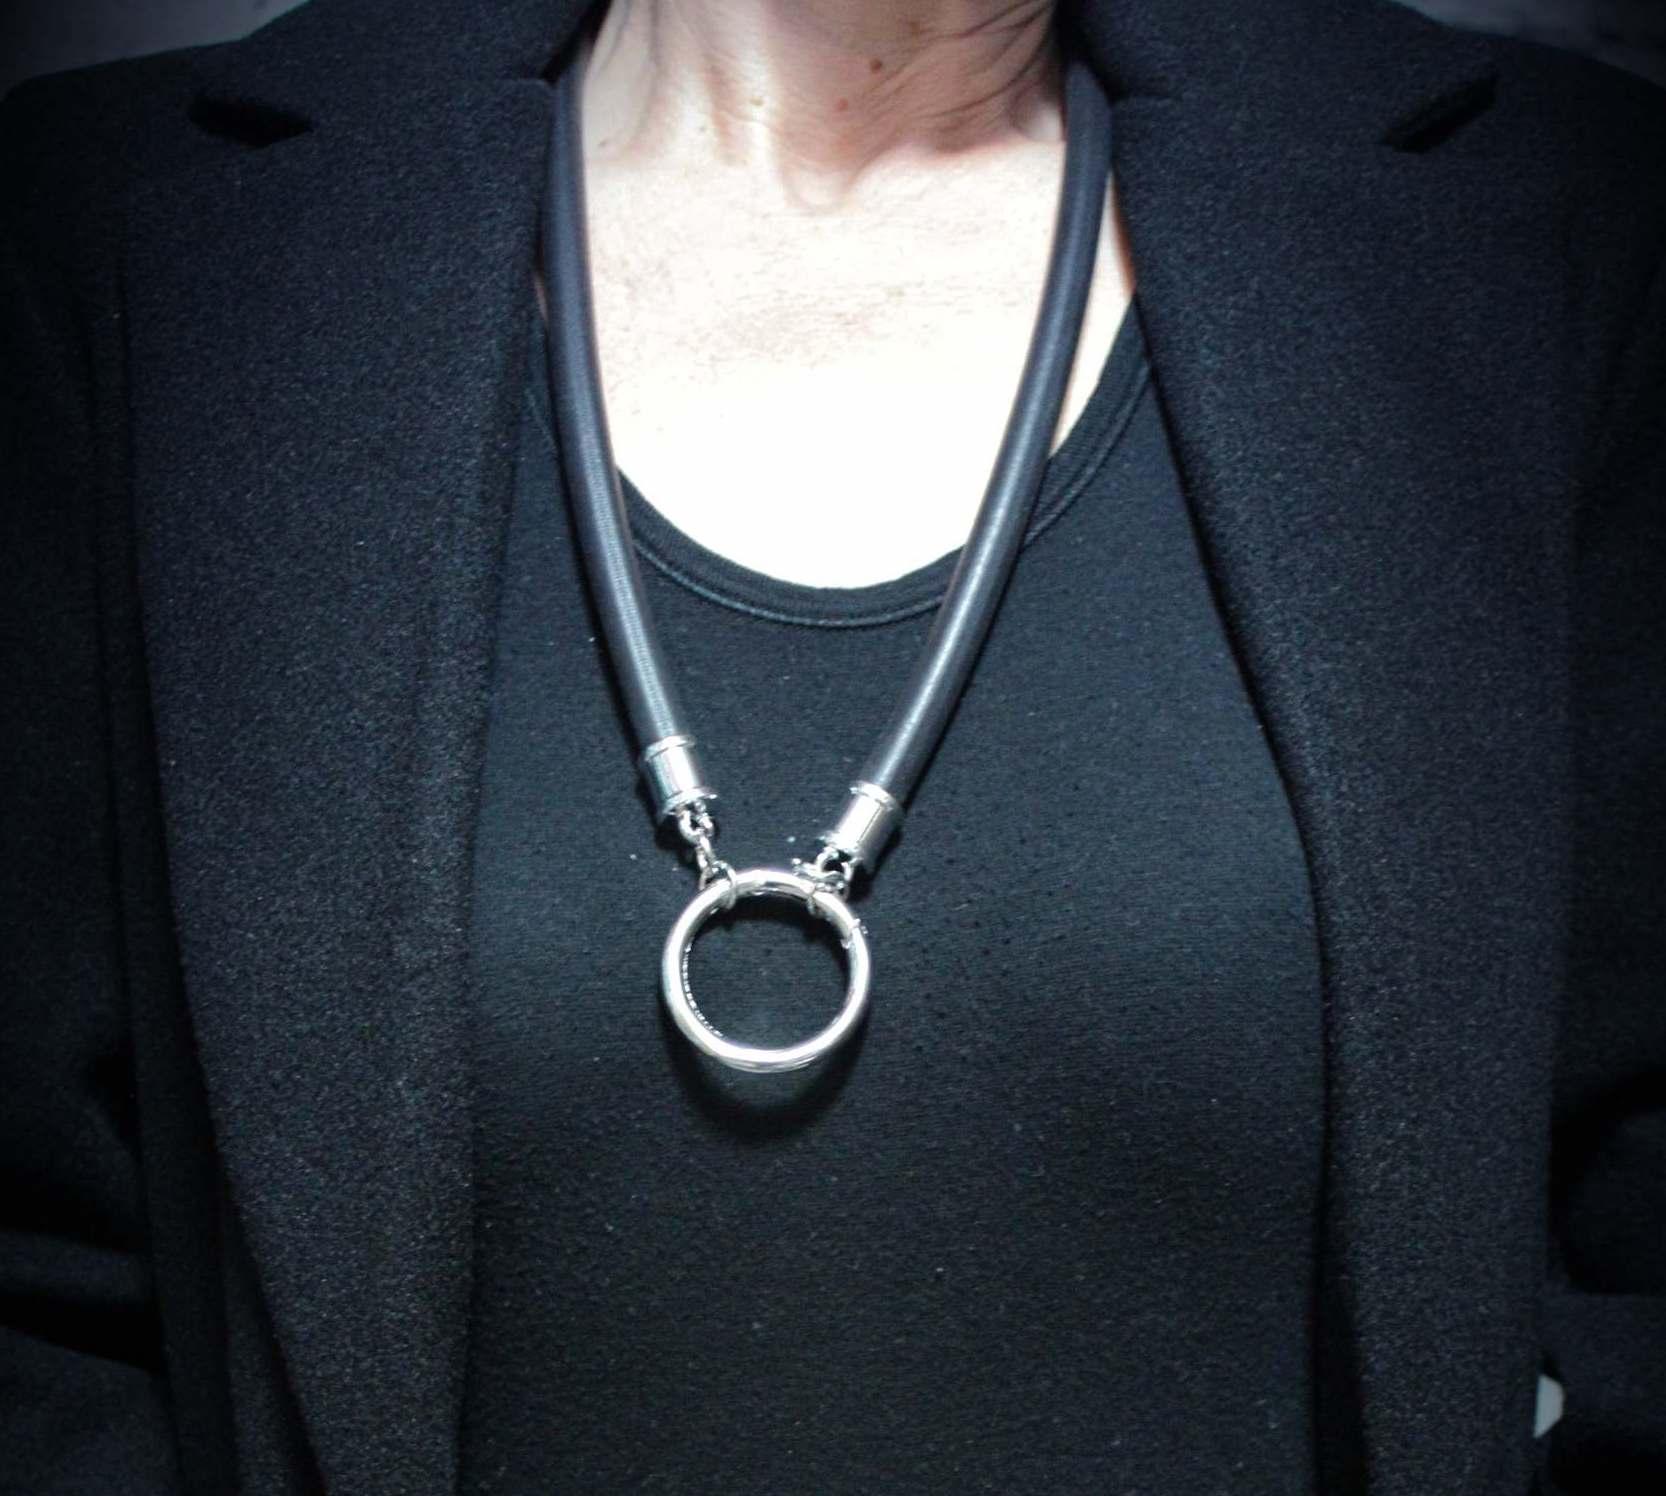 Rubber O Ring Necklace